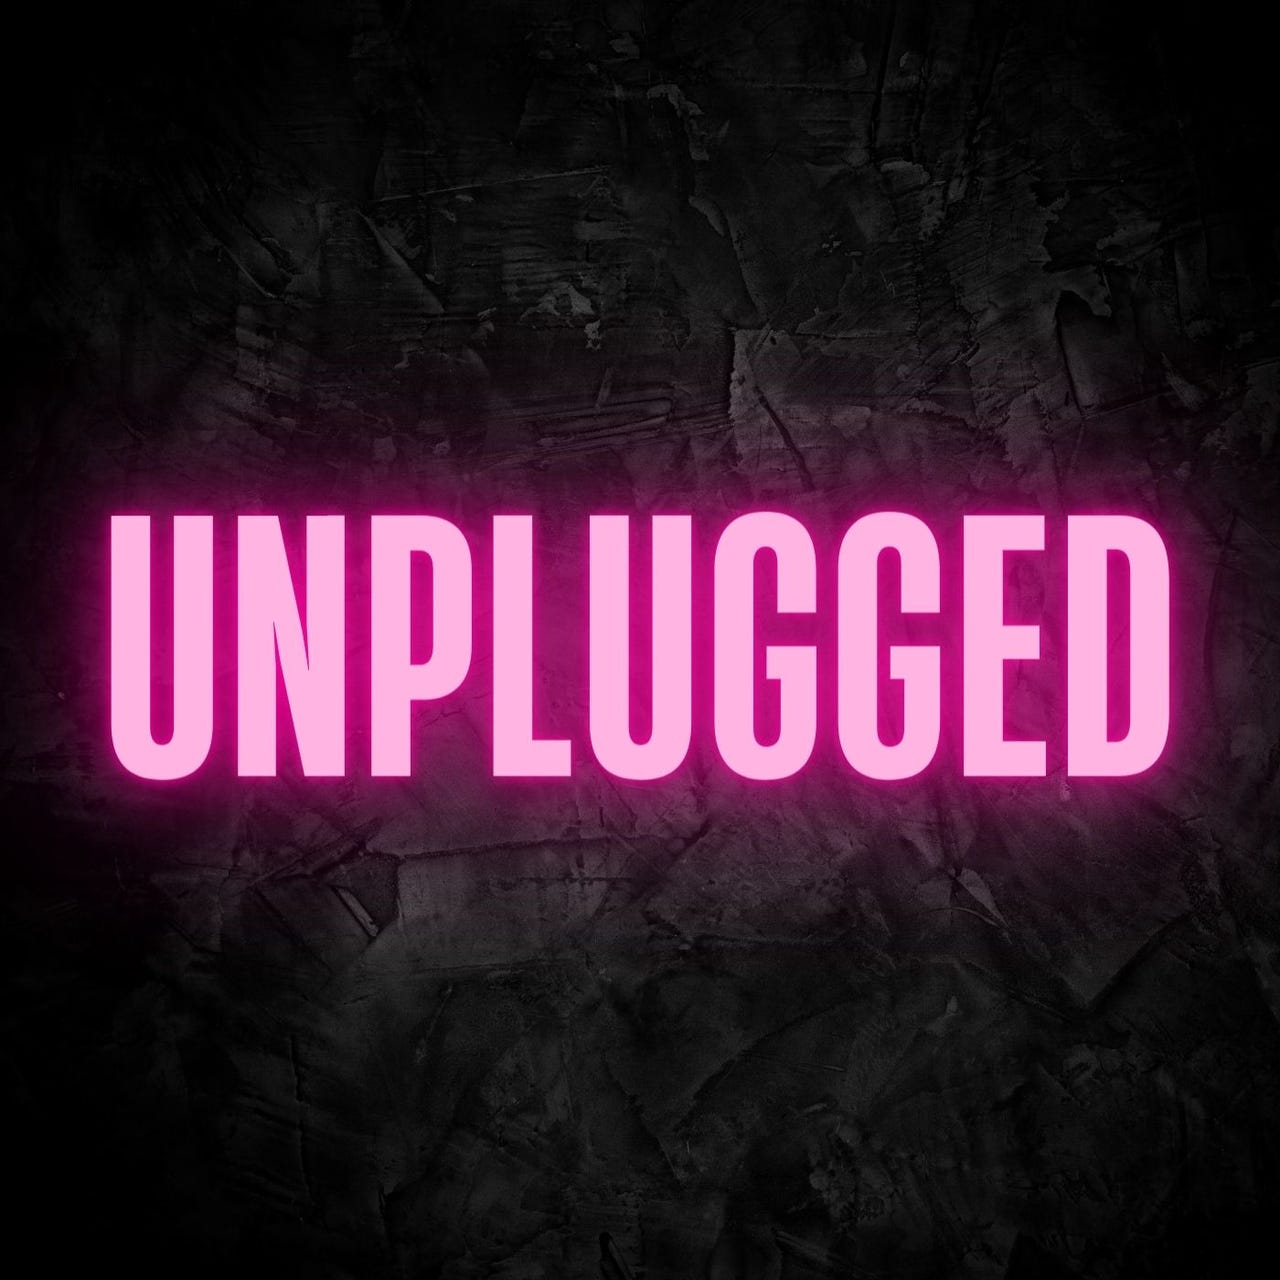 Artwork for Unplugged from All Punked Up